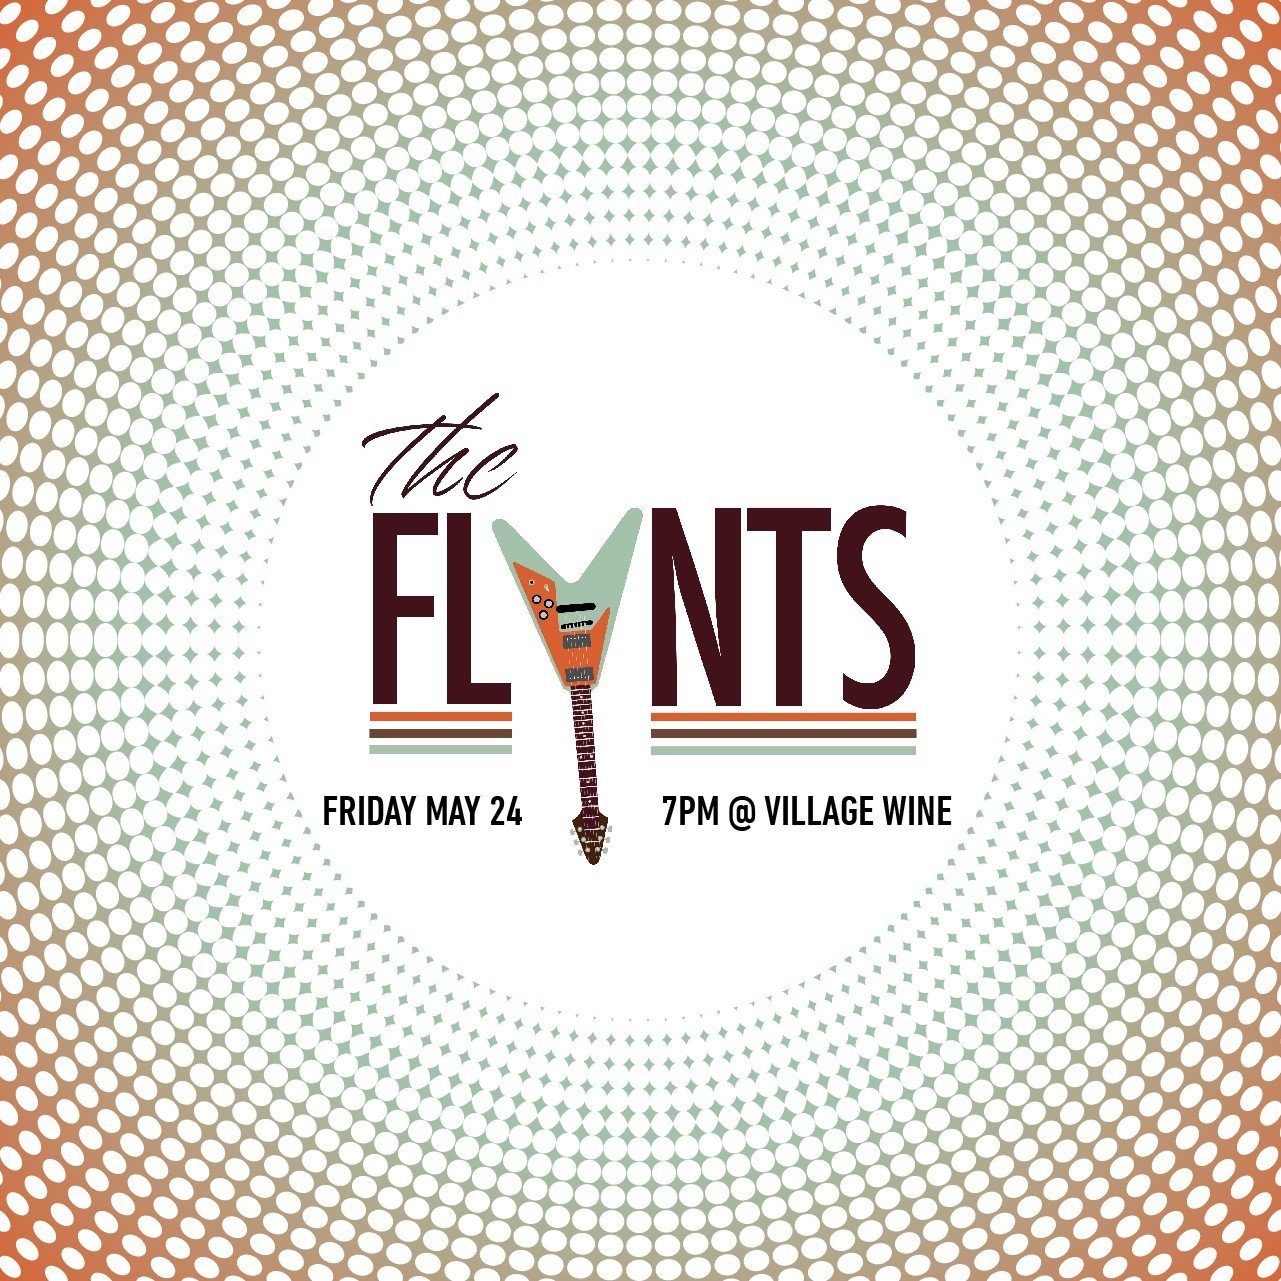 The Flynts this Friday in the Loft!! 7pm on the 3rd floor loft, we'll have bar service upstairs!